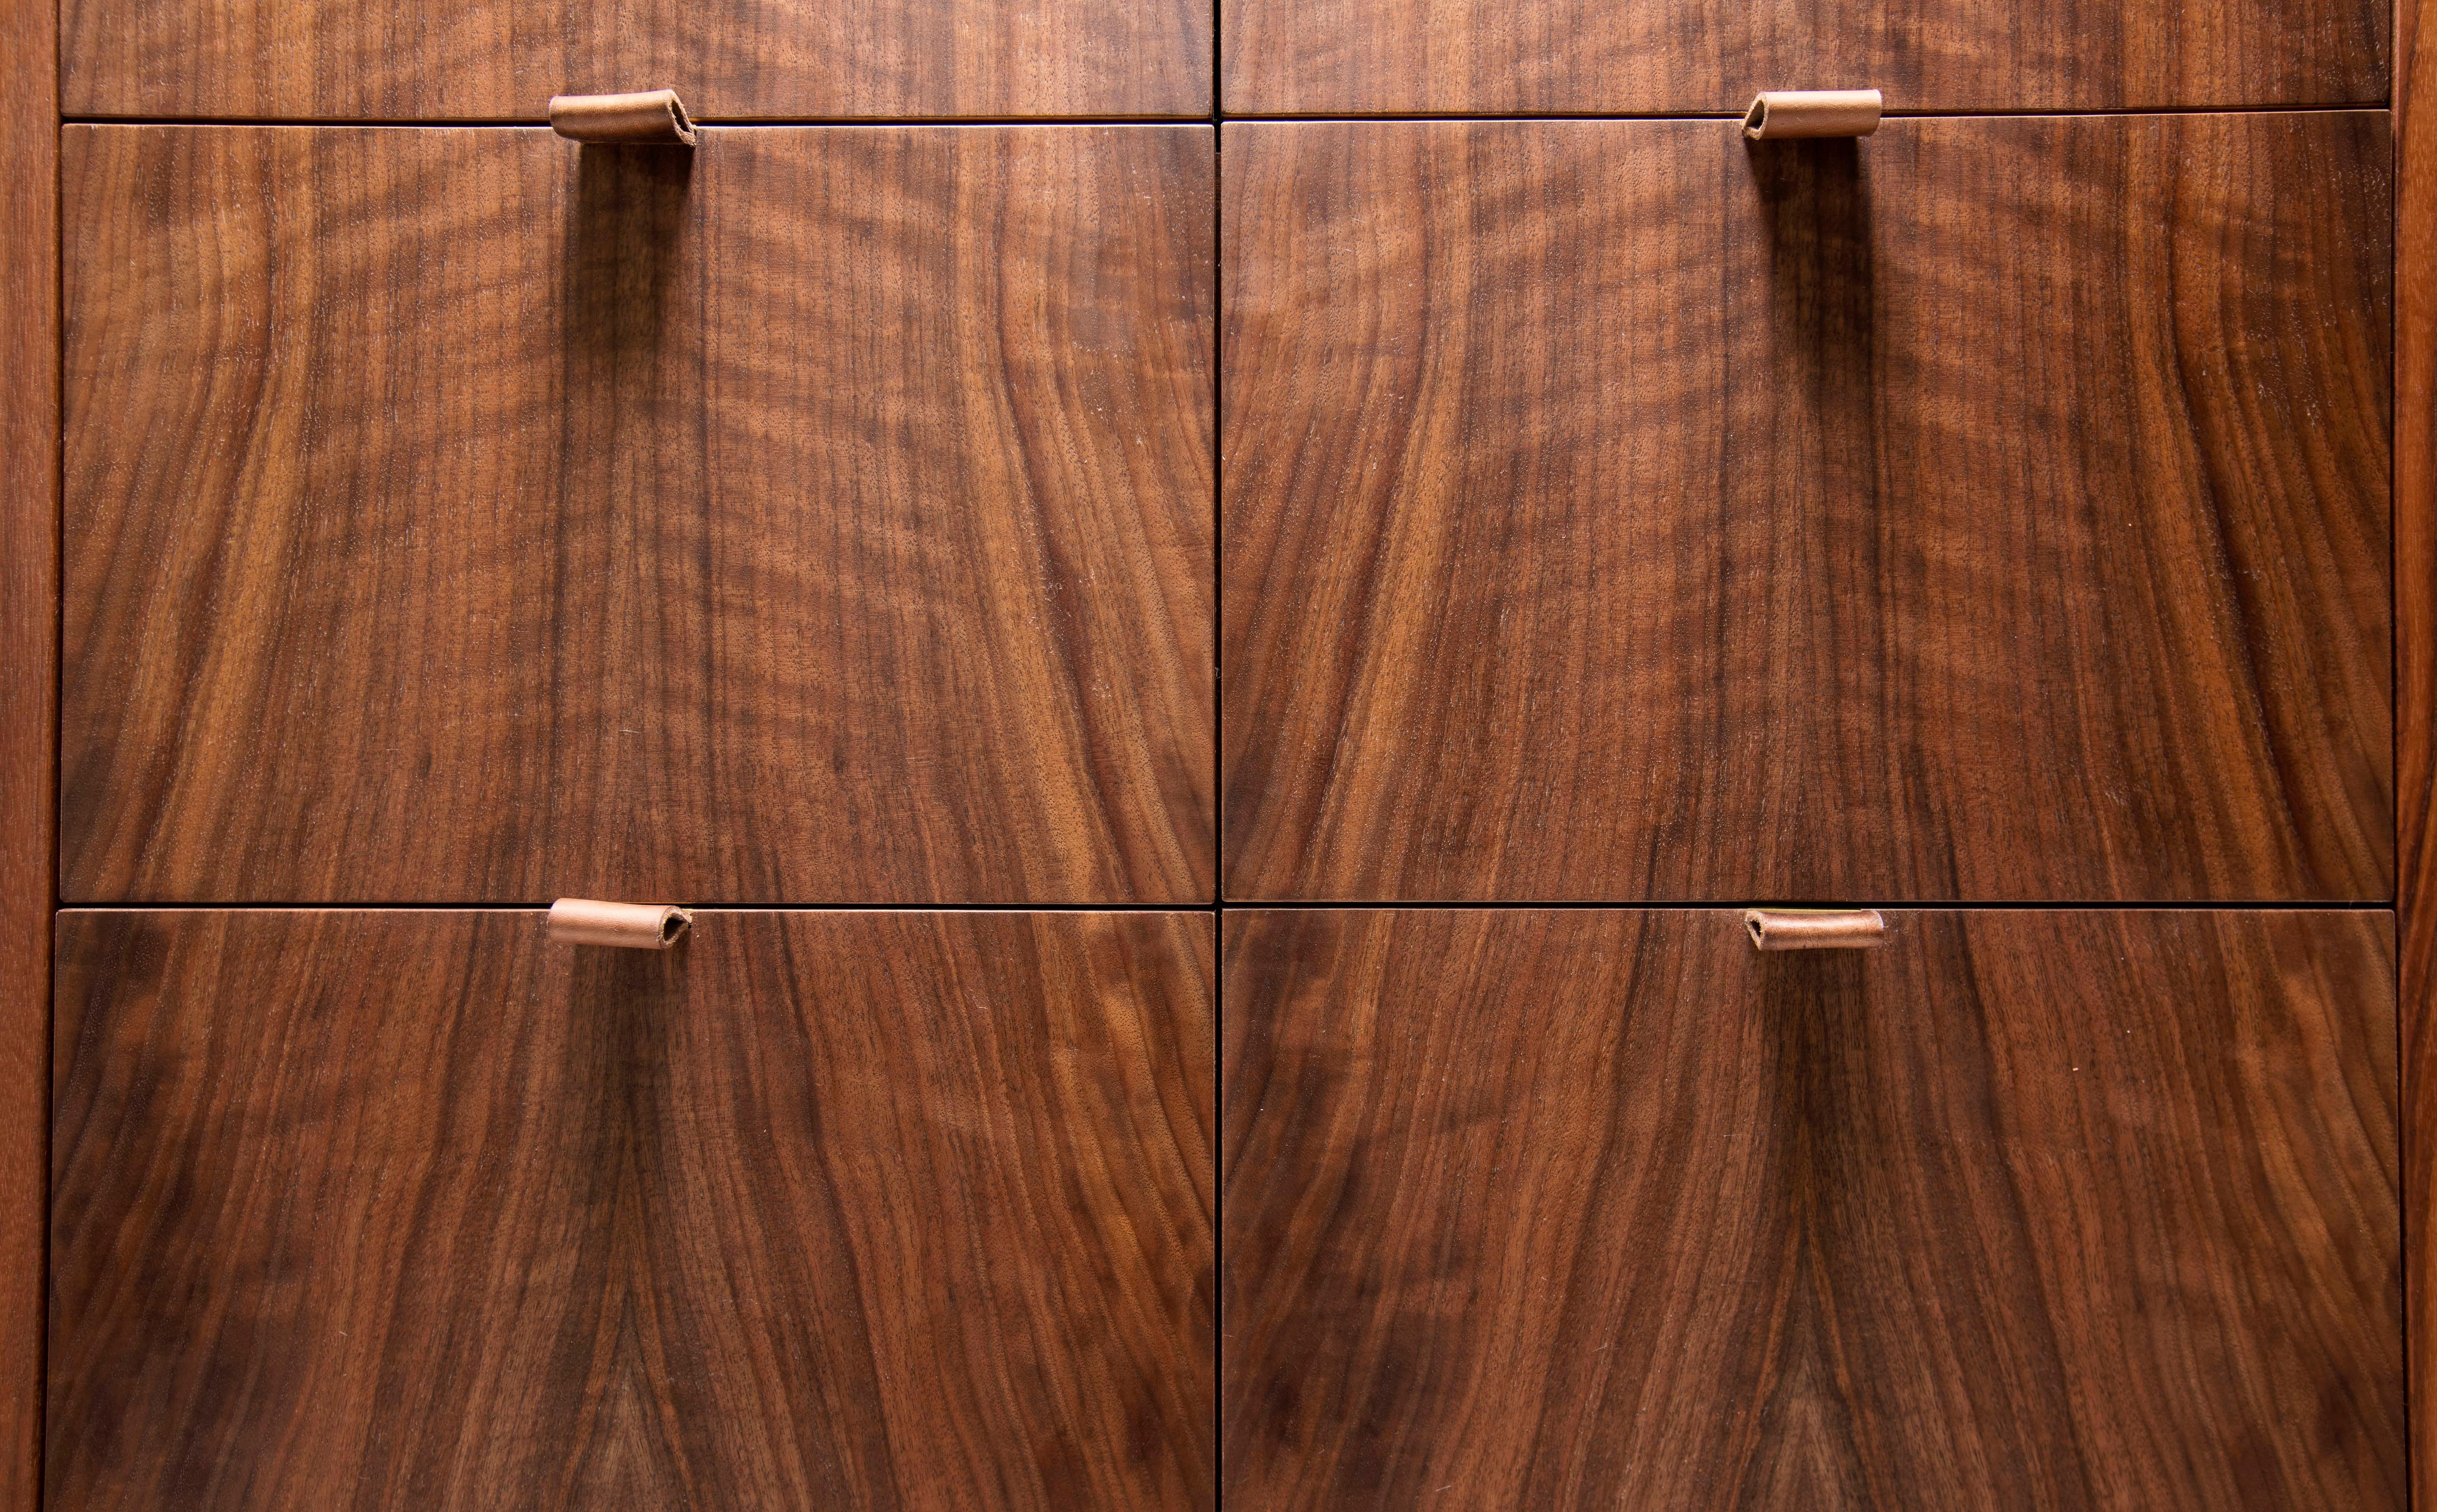 Hand-Crafted Tallboy Dresser with Figured Claro Walnut Front by Boyd & Allister For Sale